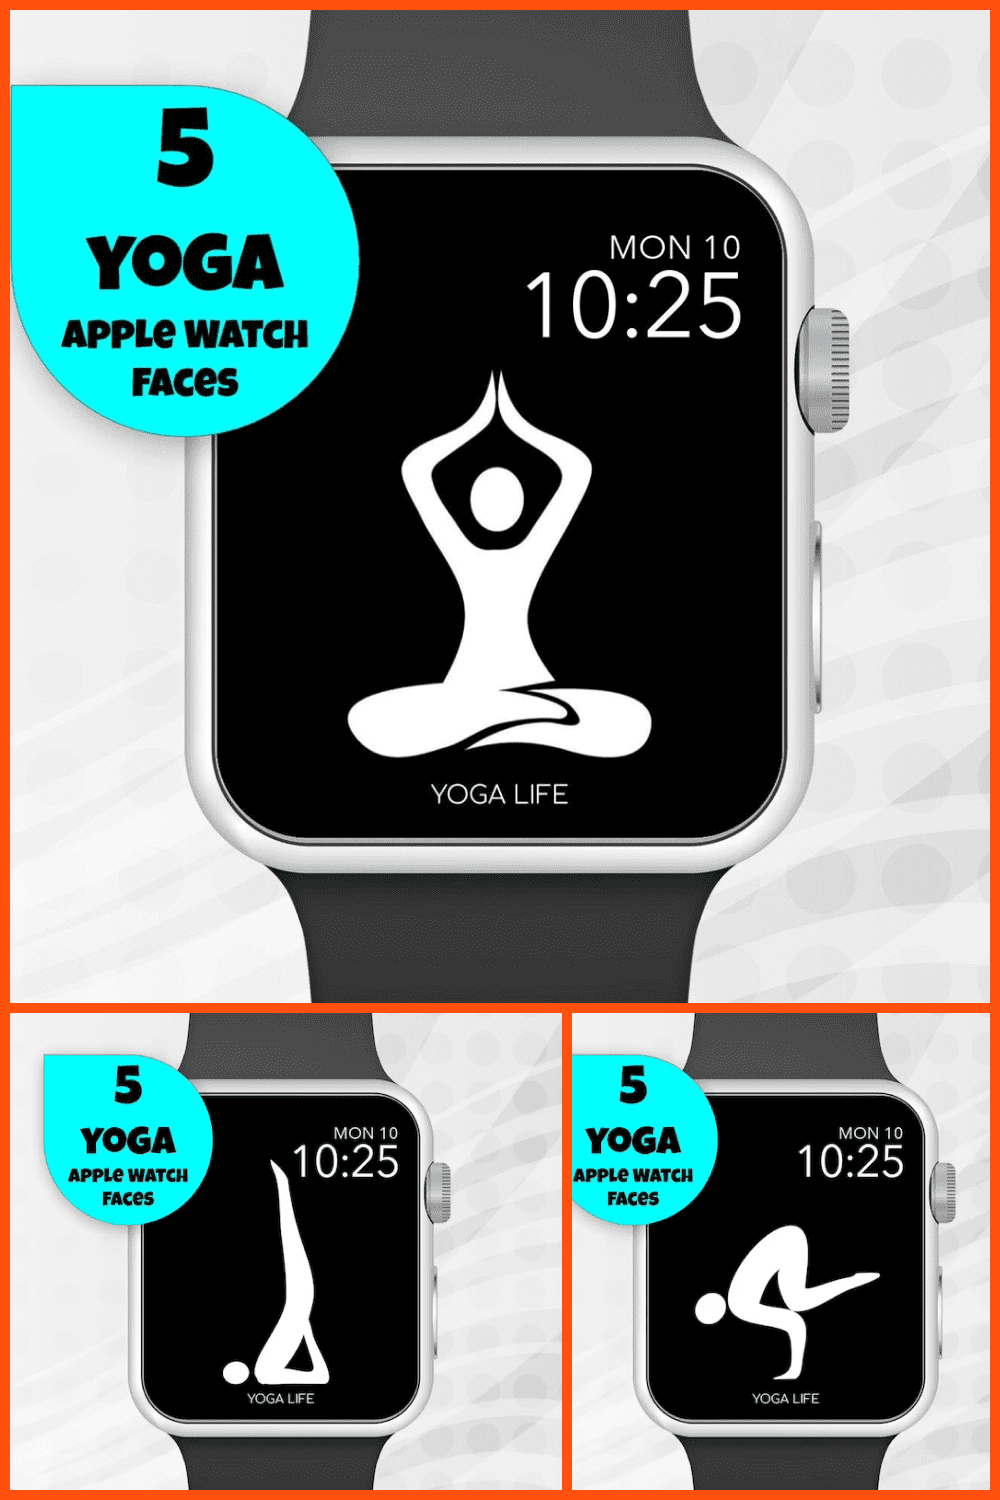 Apple watch face with a person in asana.